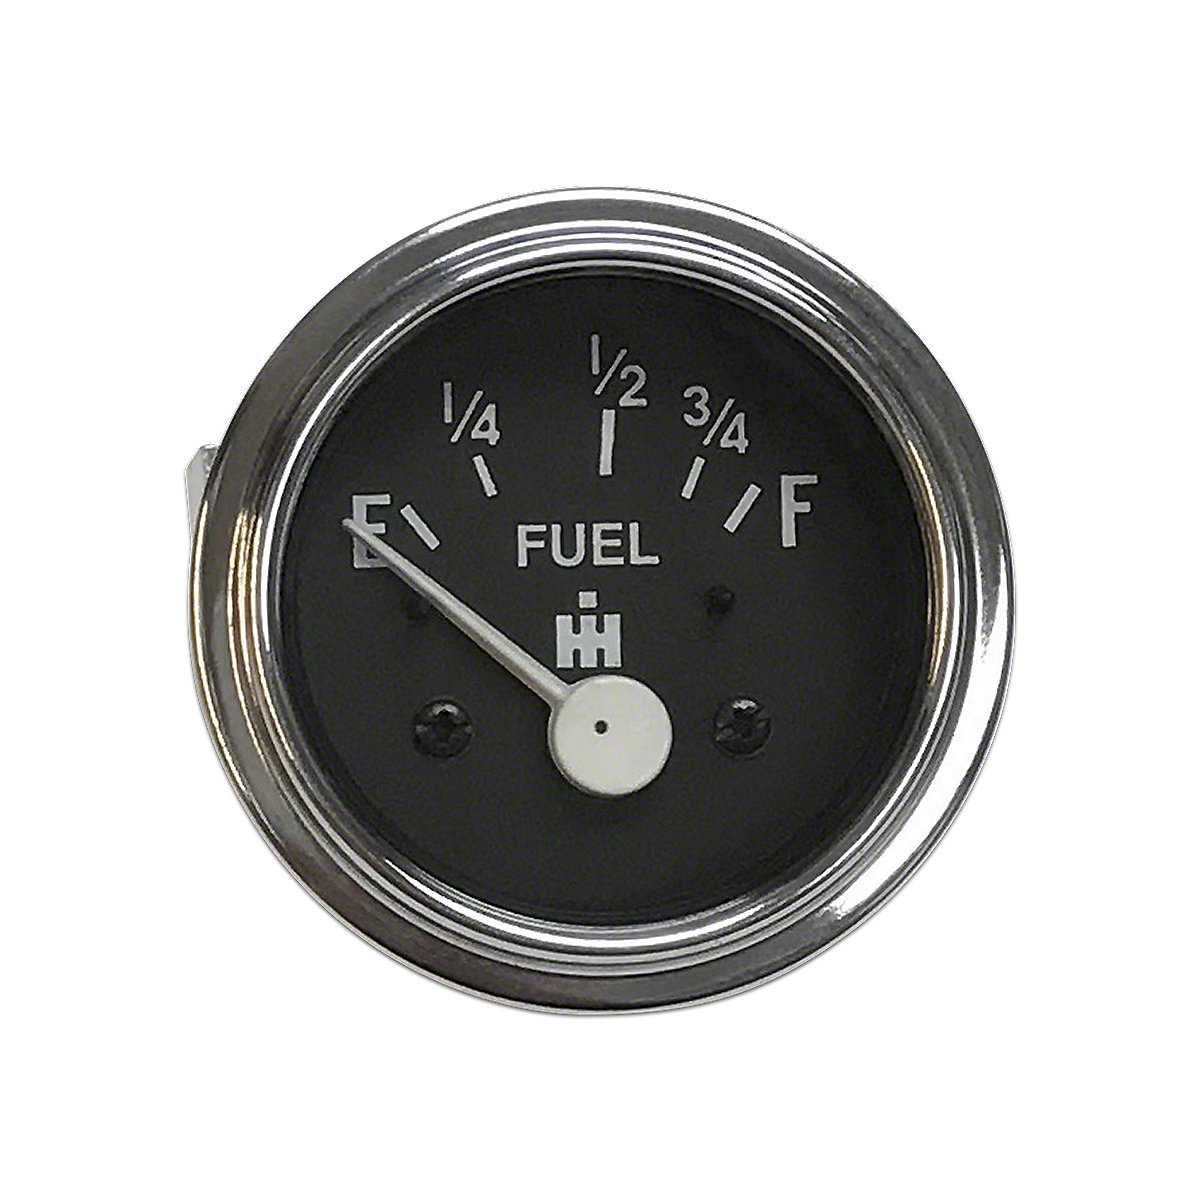 560 fuel gauge (Rochester style)